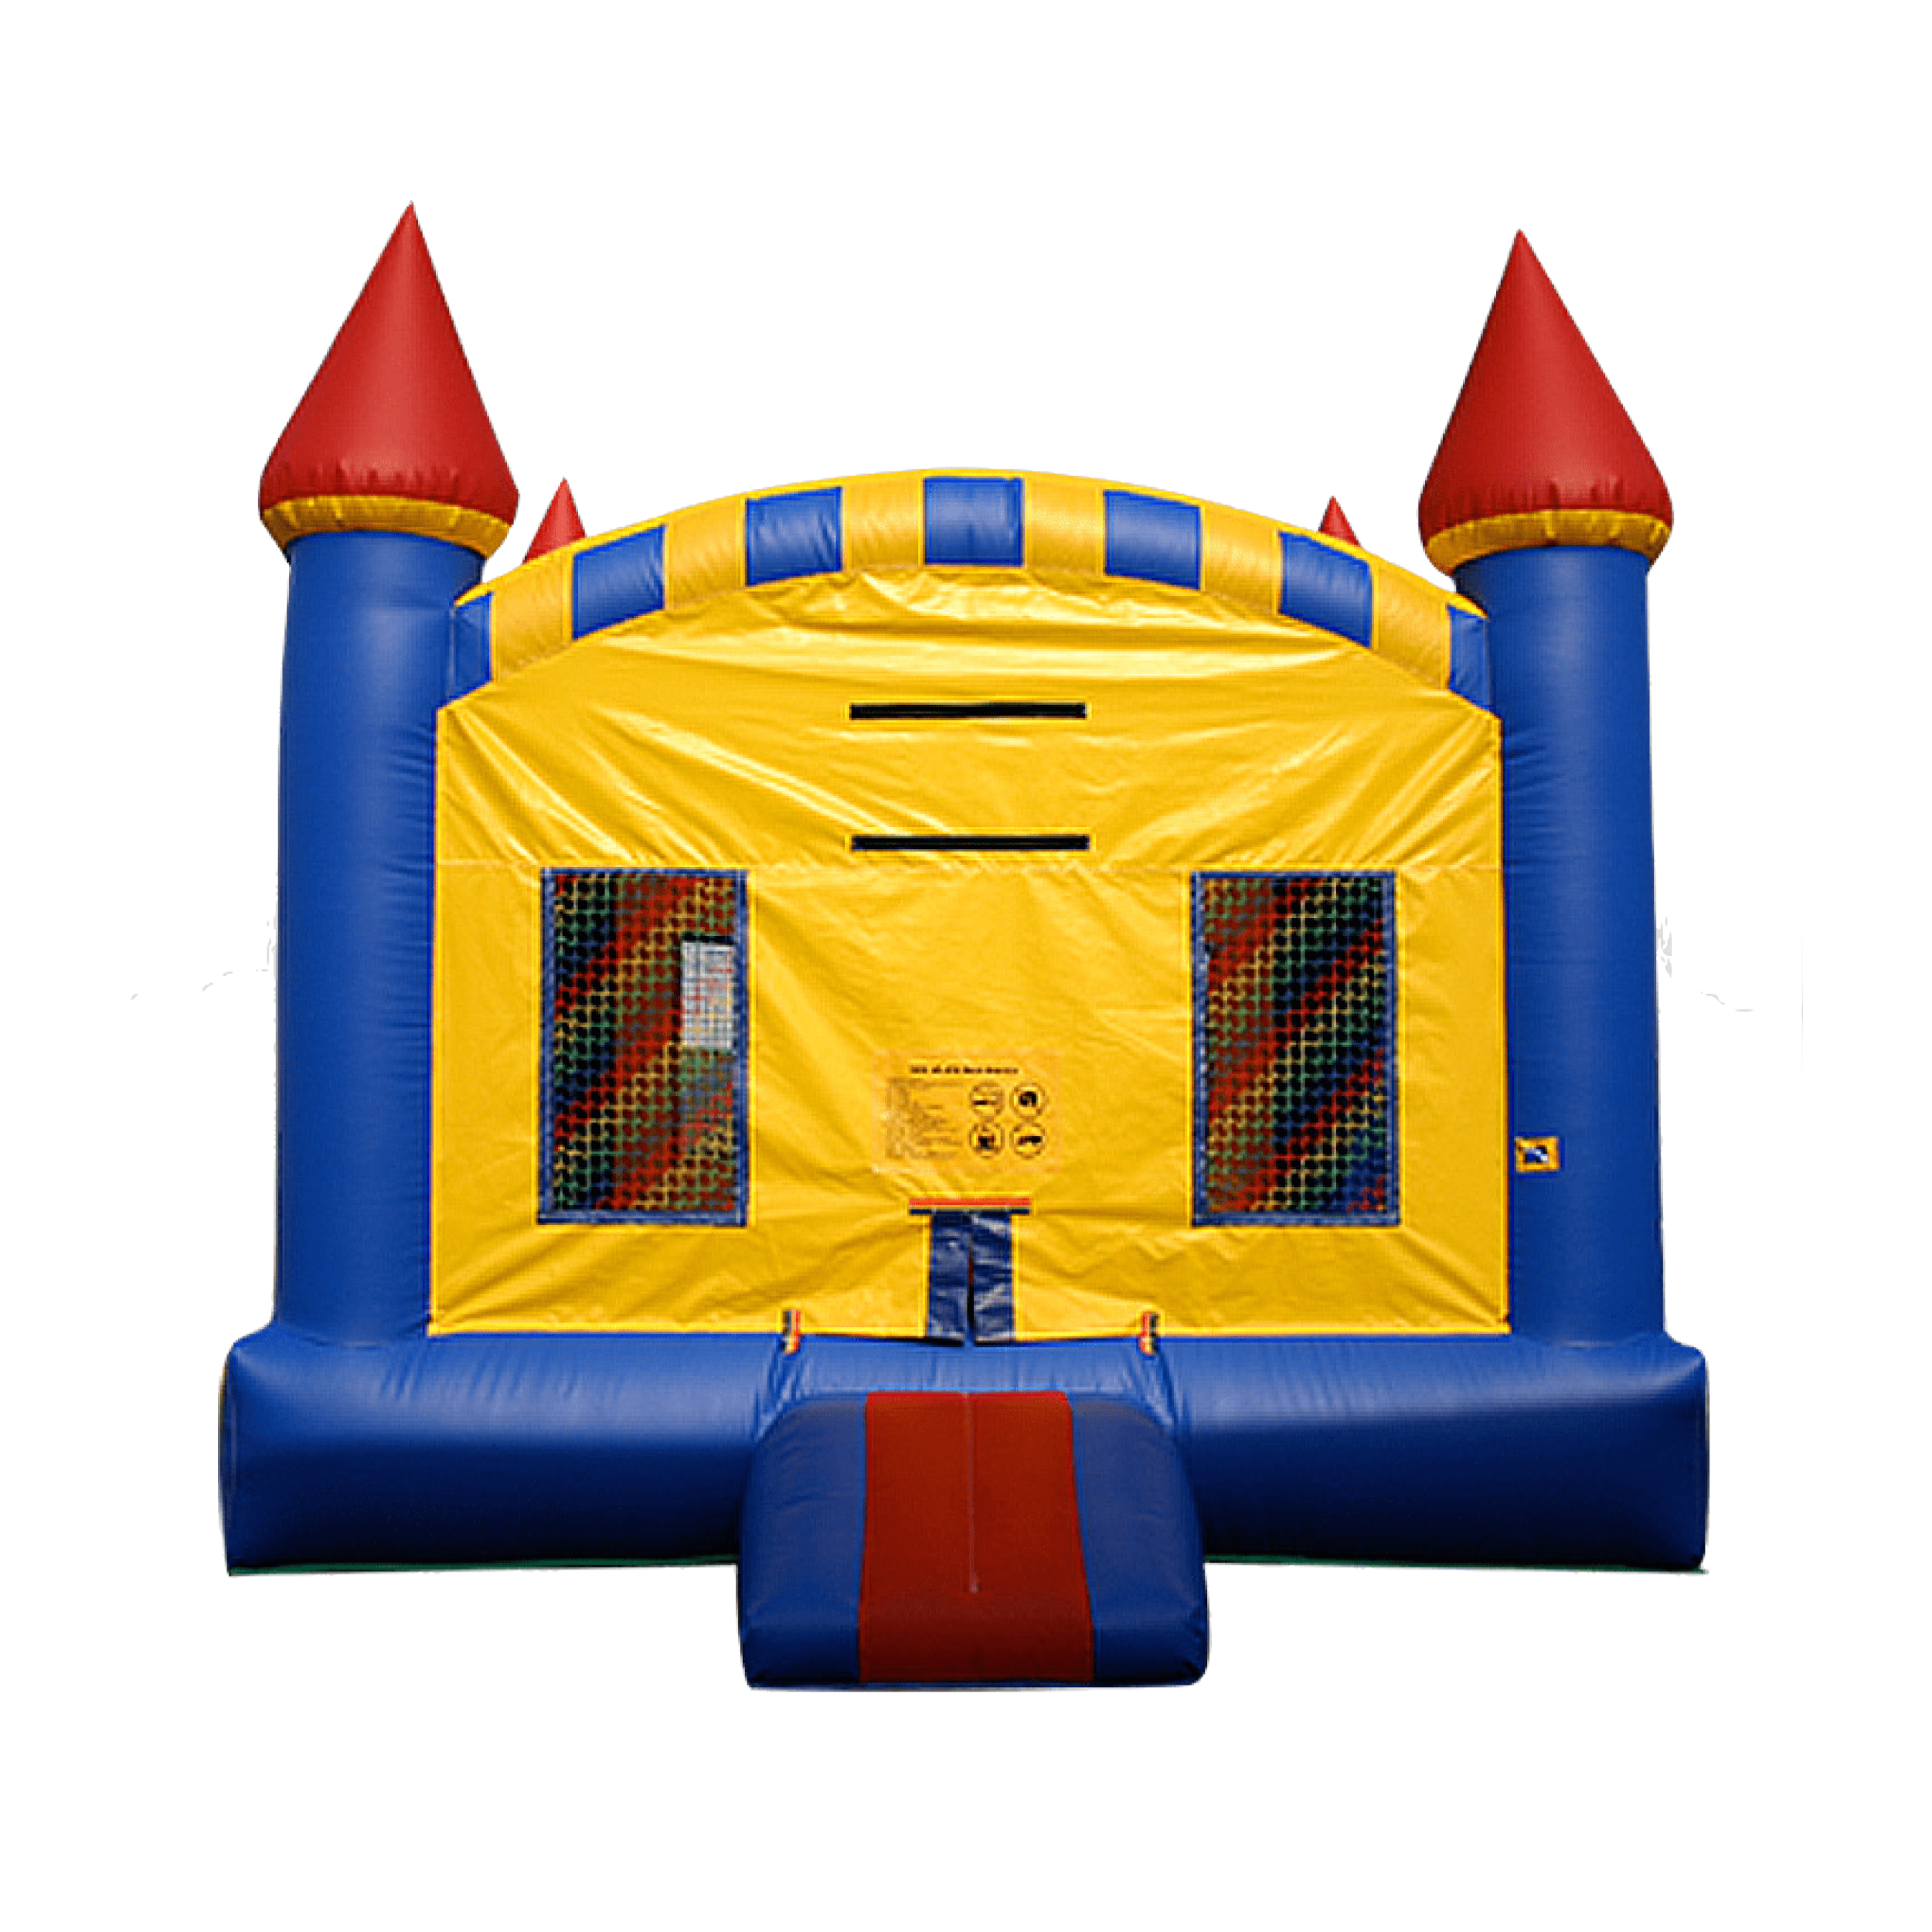 Bounce House Drawing at GetDrawings Free download